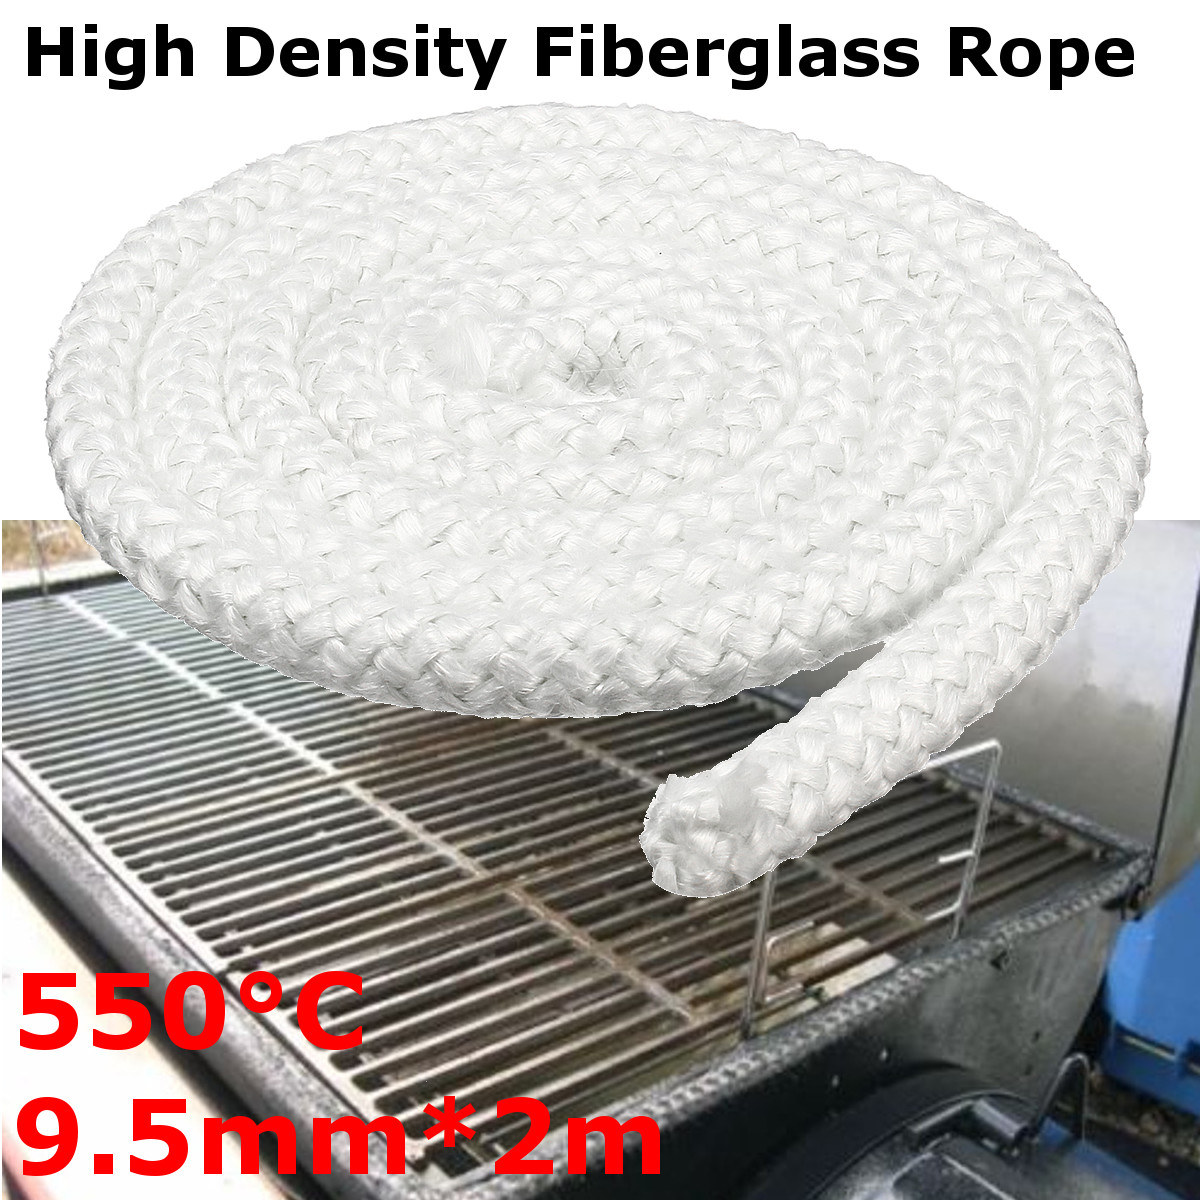 Fireplace Gasket Awesome Wood Stove Door Gasket Round Fiberglass Rope Seal High Density Fibreglass Strips Rope 9 5mmx2m